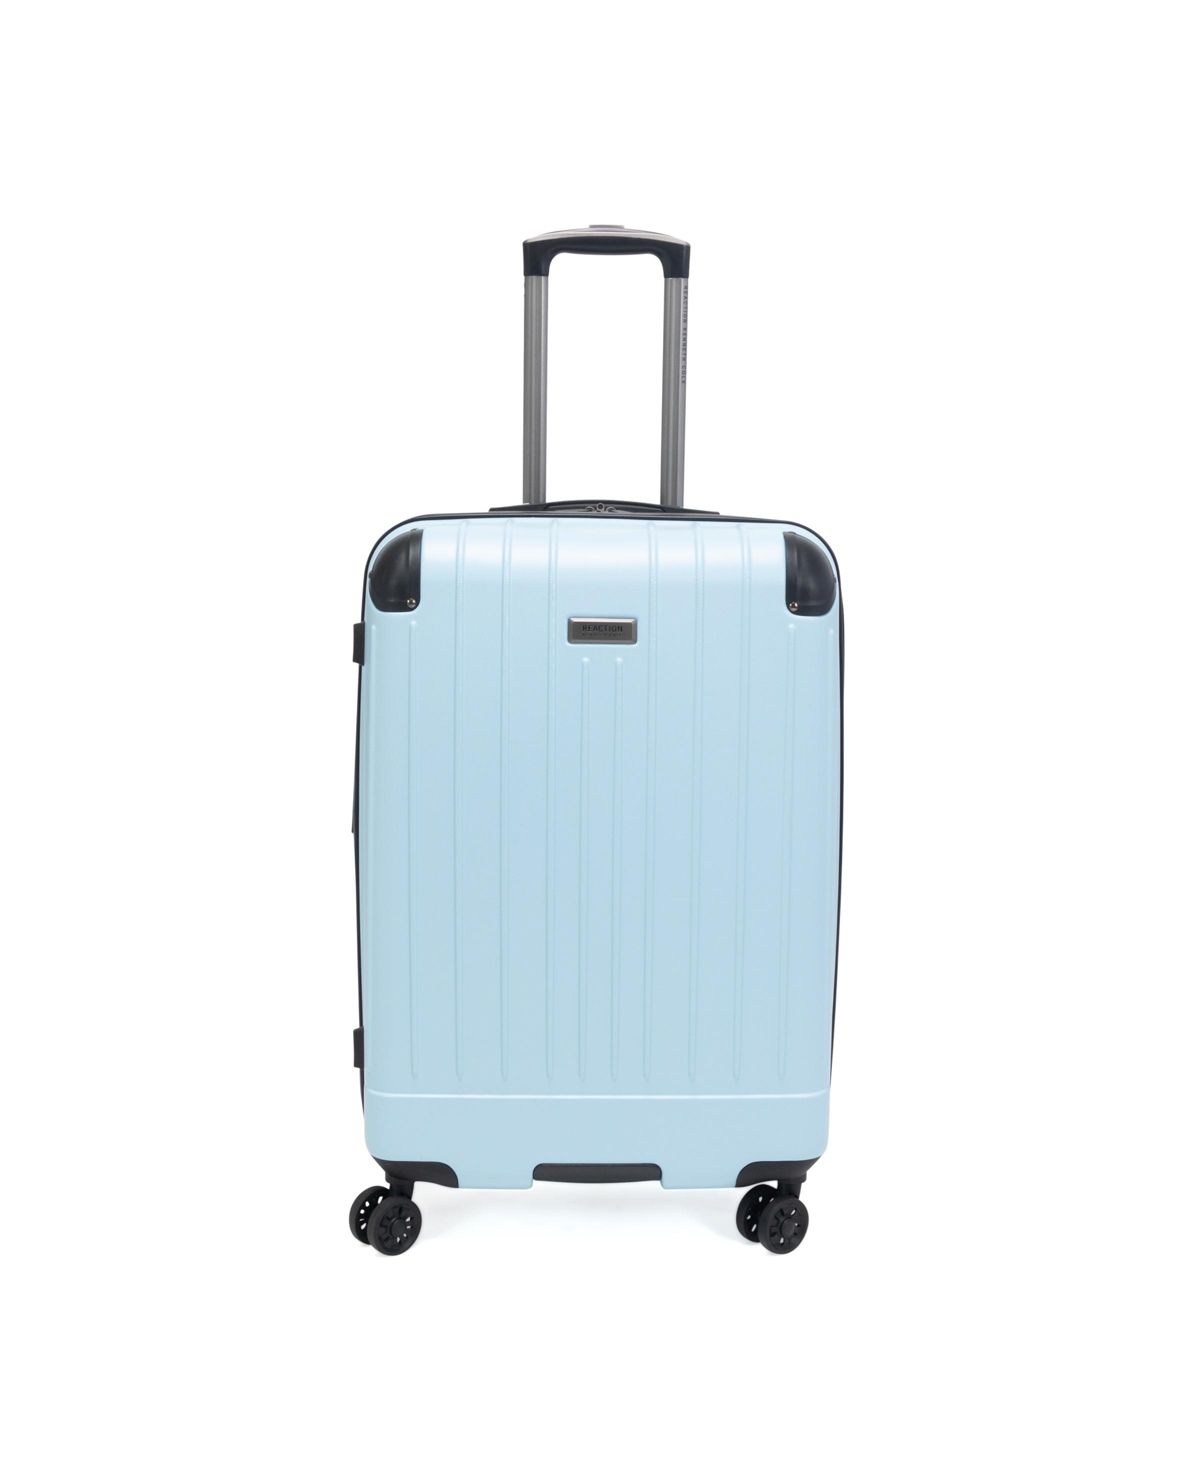 Kenneth Cole Reaction Flying Axis 24" Hardside Expandable Checked Luggage In Dream Blue